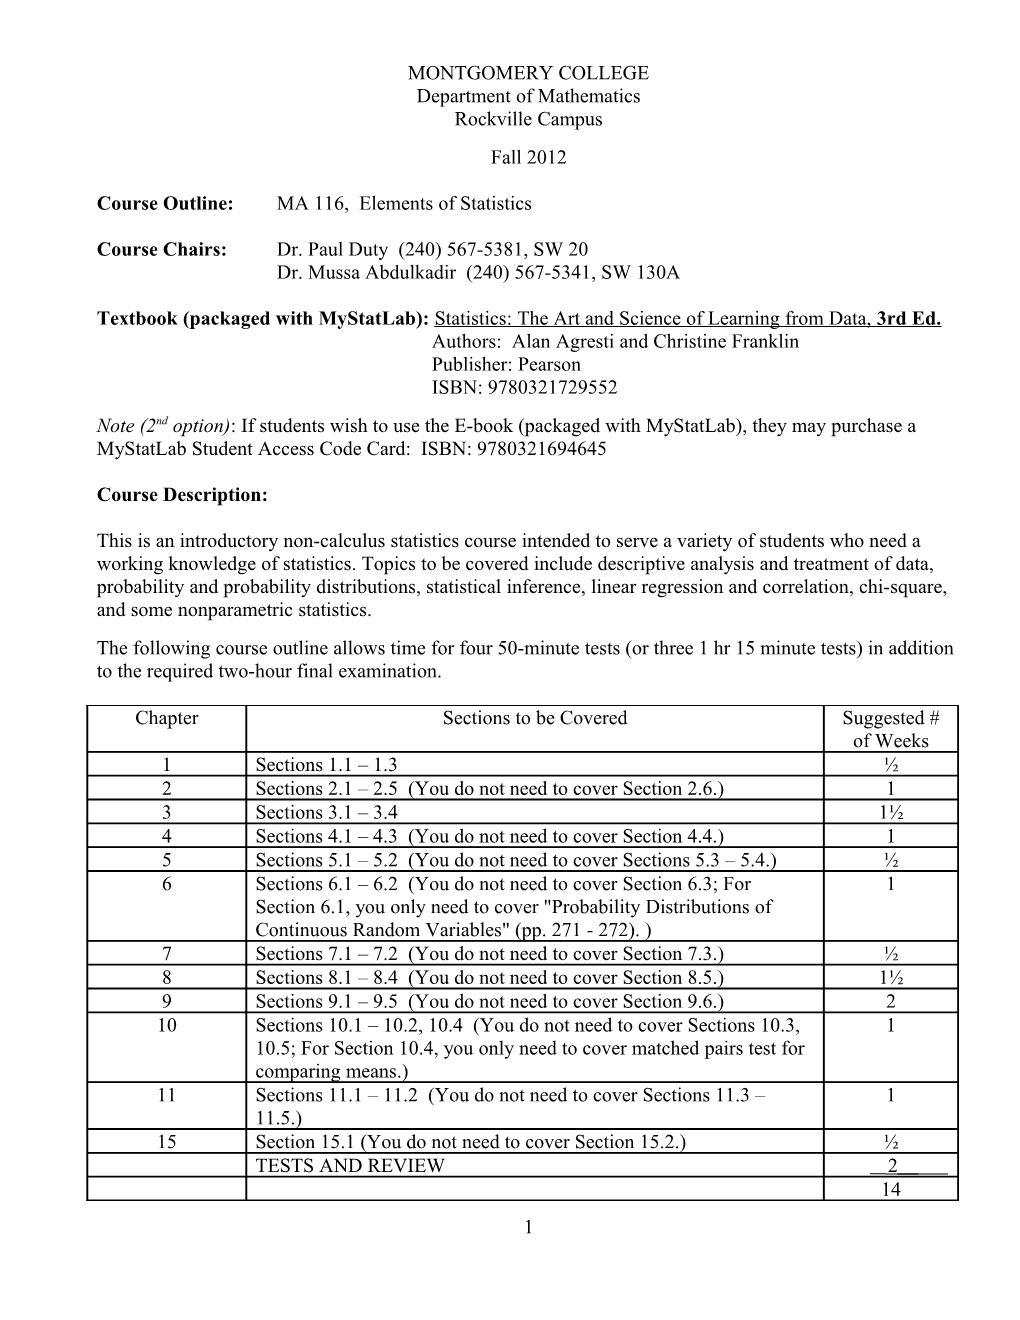 Course Outline: MA 116, Elements of Statistics